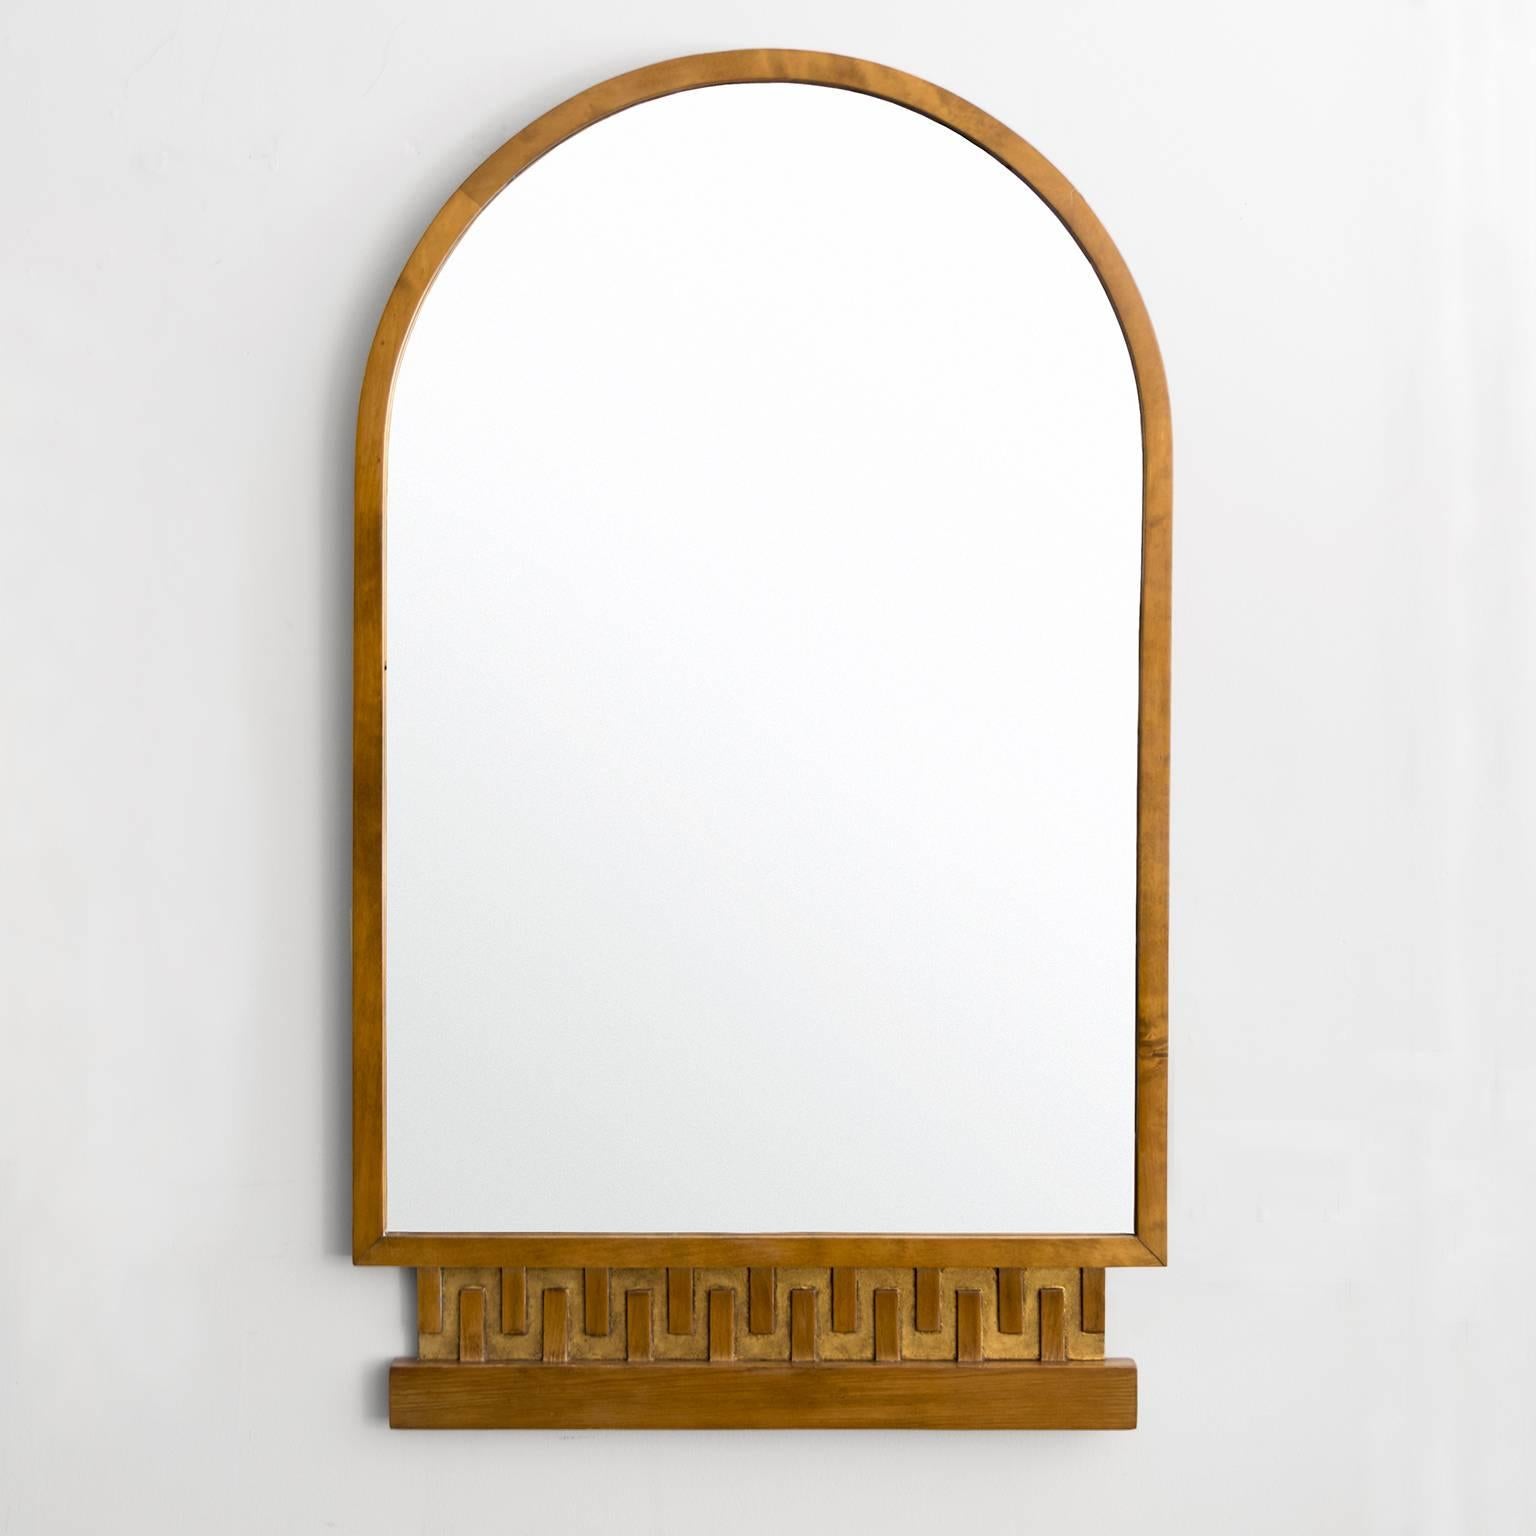 Scandinavian Modern stained elmwood mirror with an arched top and a pedestal shaped bottom decorated with a giltwood Meander pattern. Newly restored, minor wear to original glass.
Measures: Height: 36.5", Width: 21.5", Depth: 1".